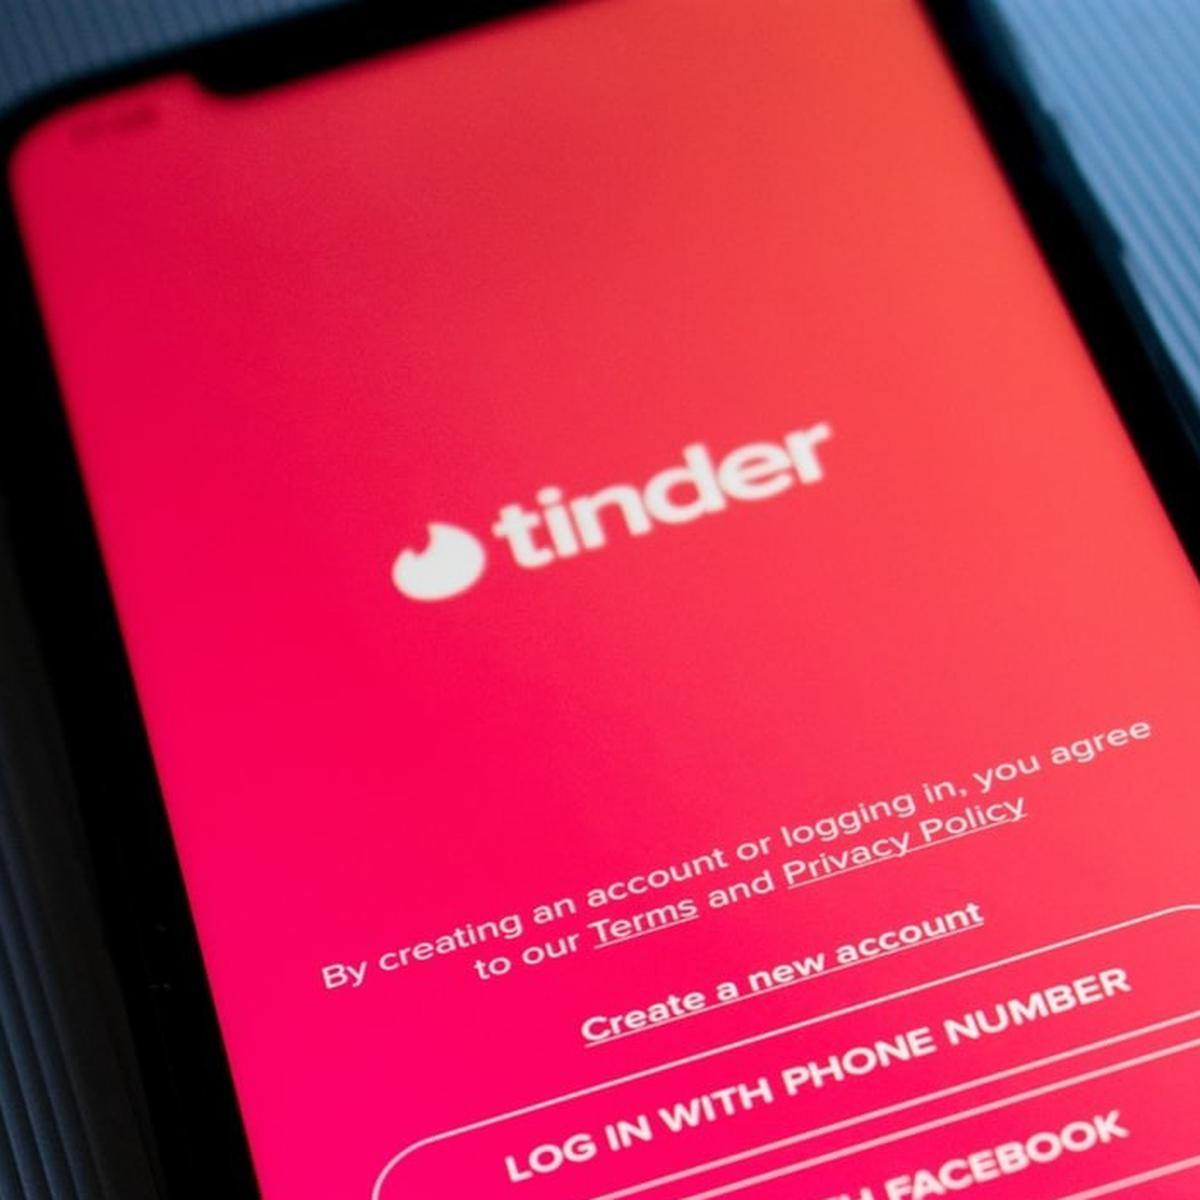 45 Tinder Opening Lines For Girls 2021